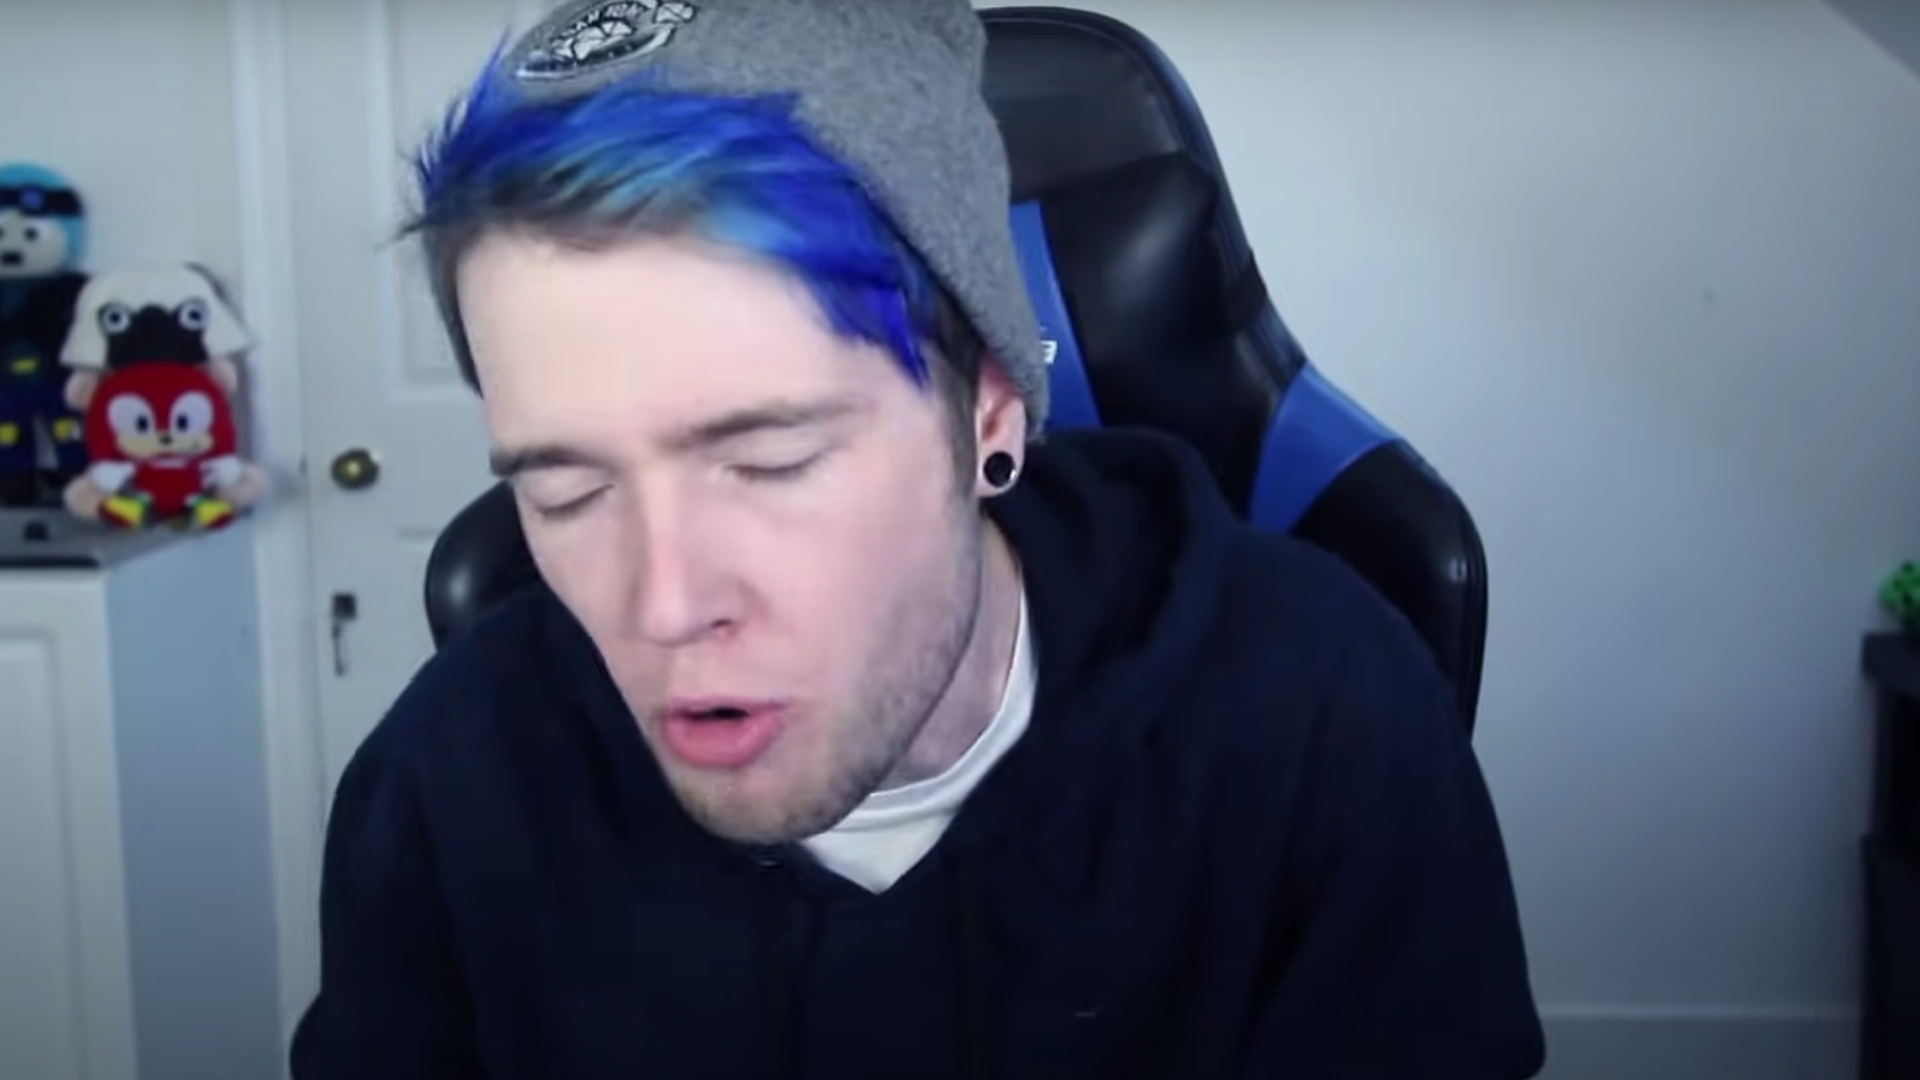 1. Dantdm's Pink and Blue Hair Transformation - wide 2